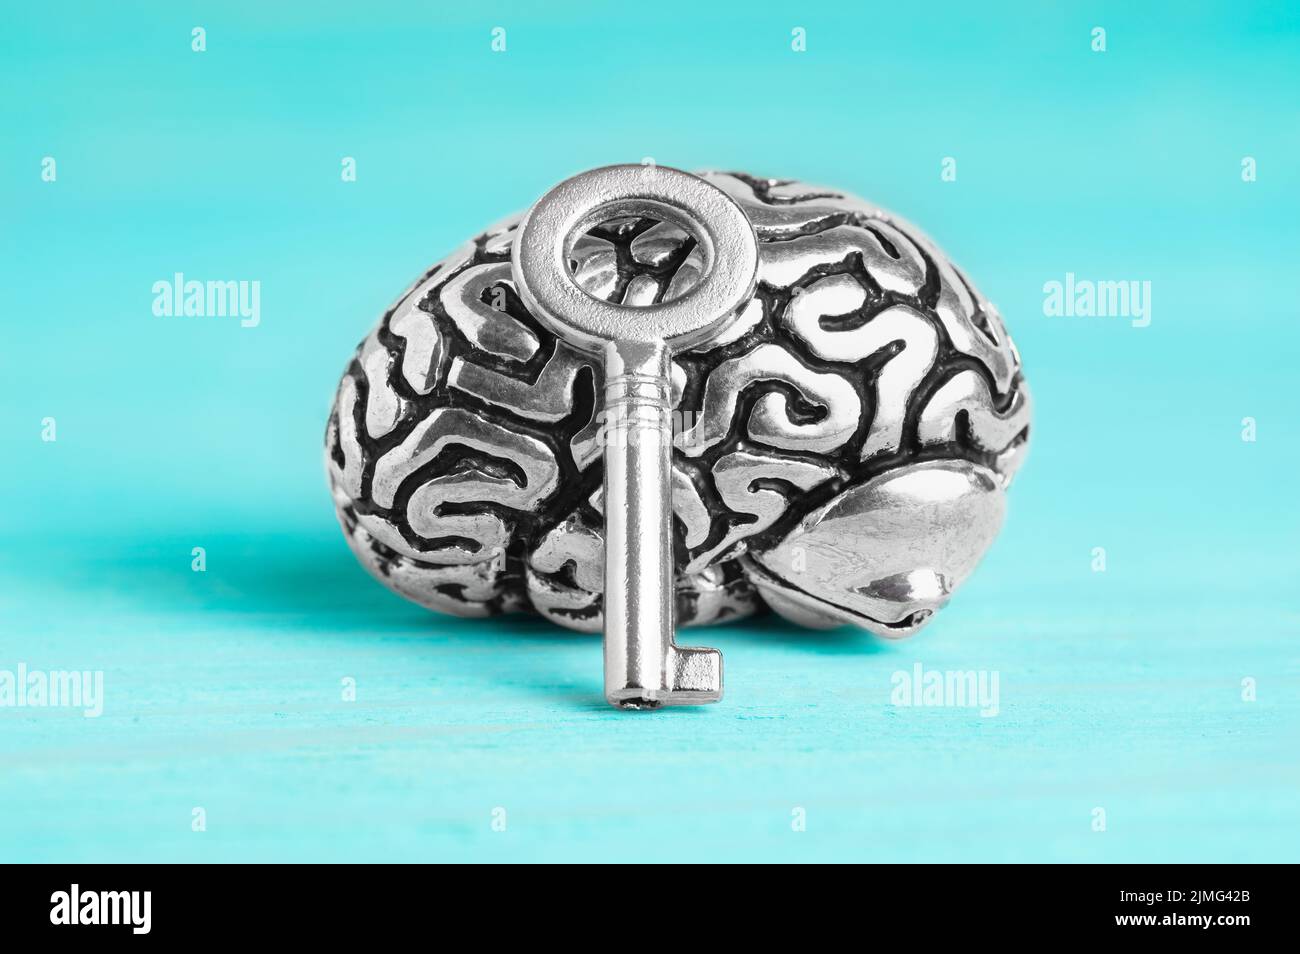 Steel human brain anatomical copy with a silver-toned master key isolated on a blue wooden background, selective focus. Mental wellbeing concept. Stock Photo